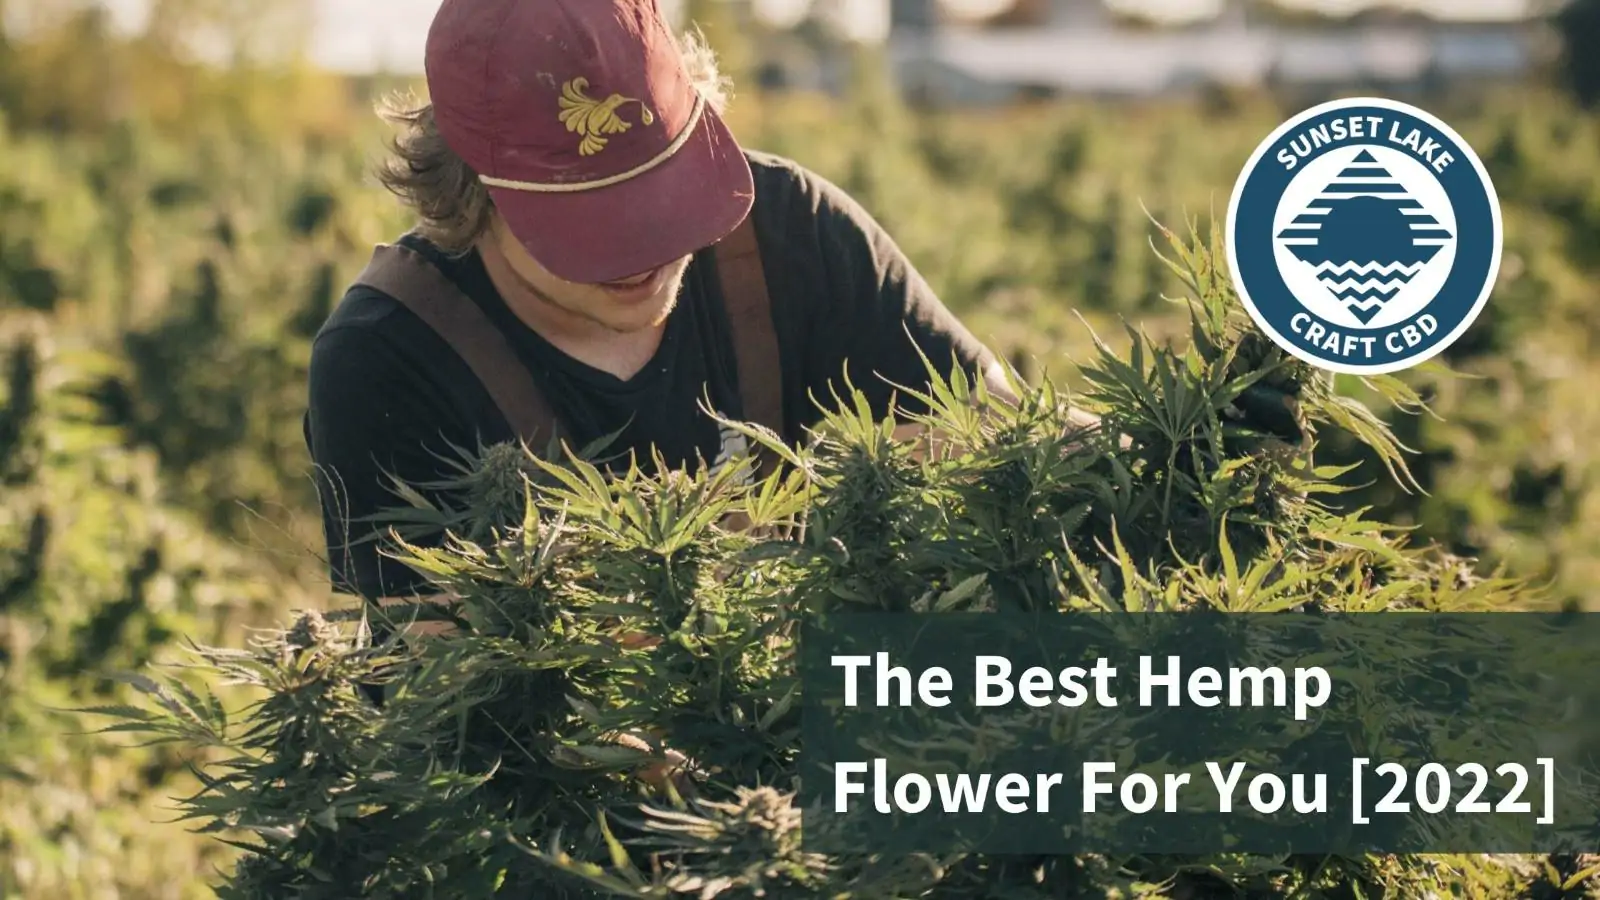 A man harvesting hemp flower with the text "The Best Hemp Flower For You [2022]"